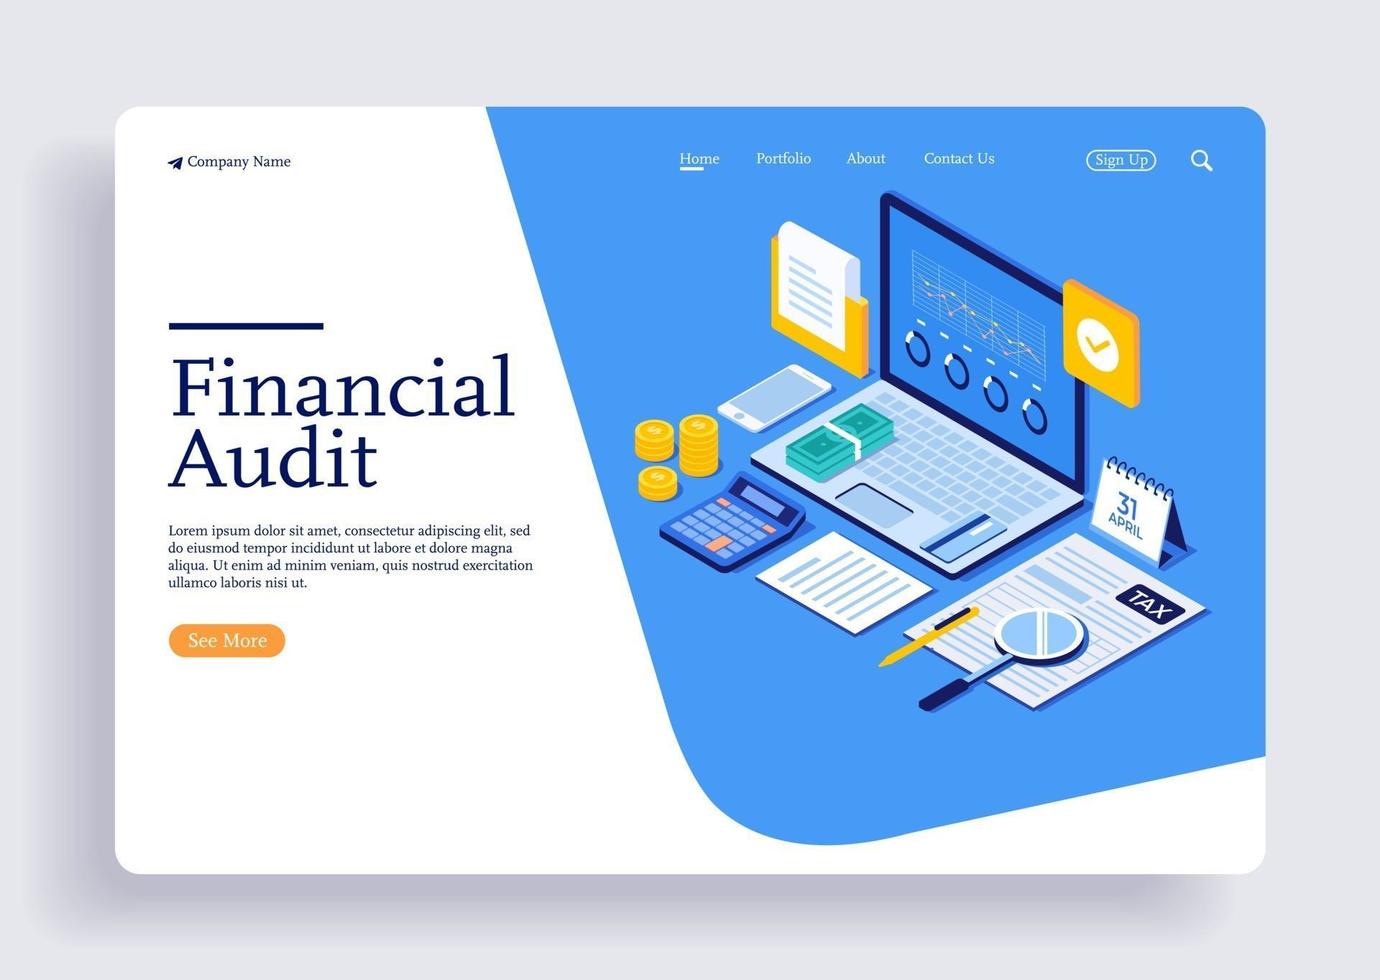 Online financial audit with documents for tax calculation vector